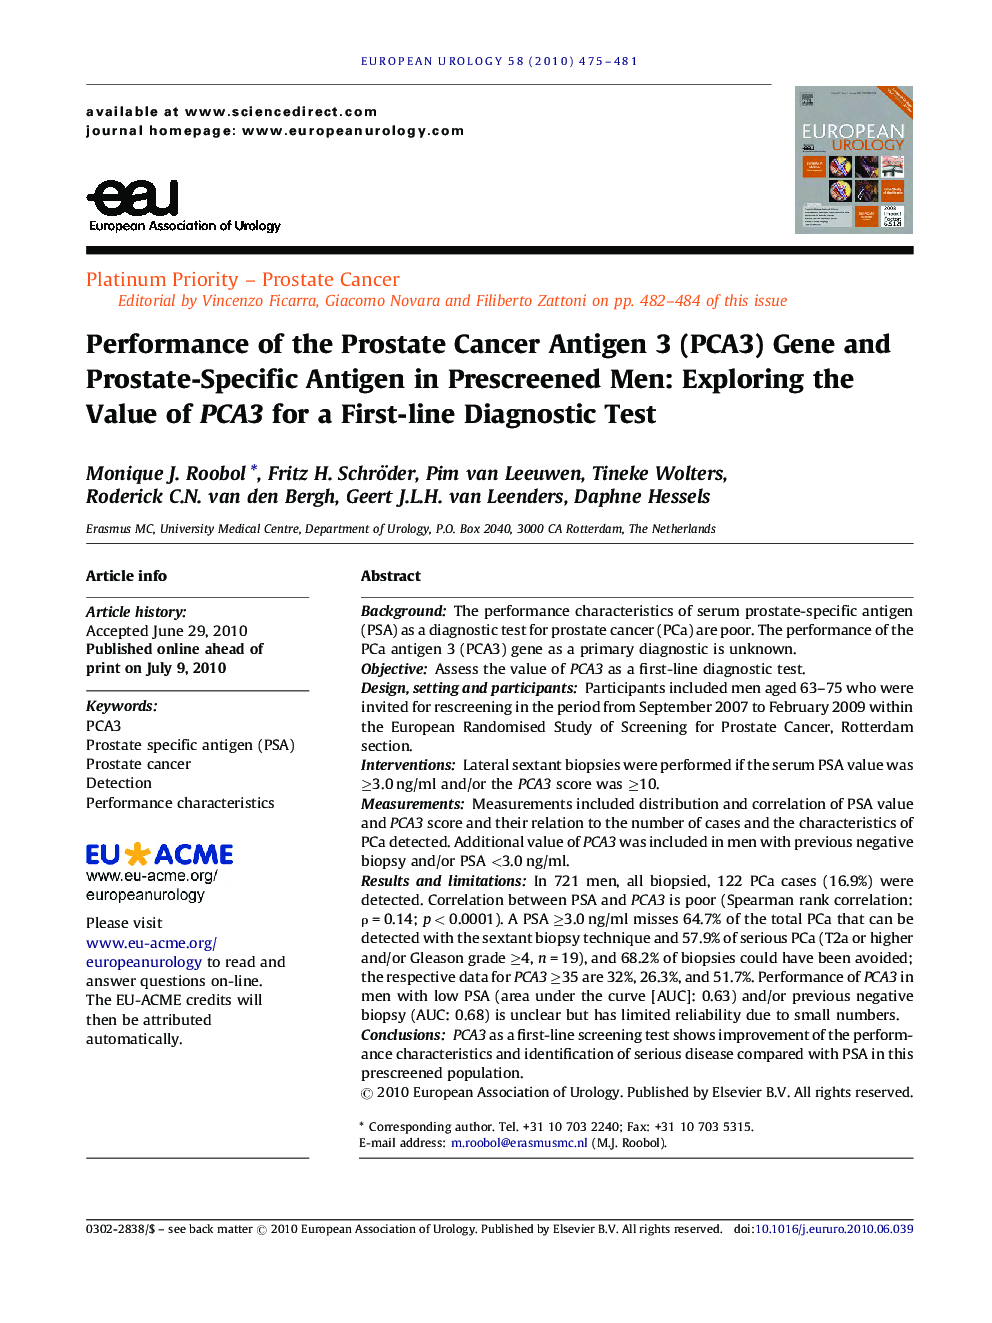 Performance of the Prostate Cancer Antigen 3 (PCA3) Gene and Prostate-Specific Antigen in Prescreened Men: Exploring the Value of PCA3 for a First-line Diagnostic Test